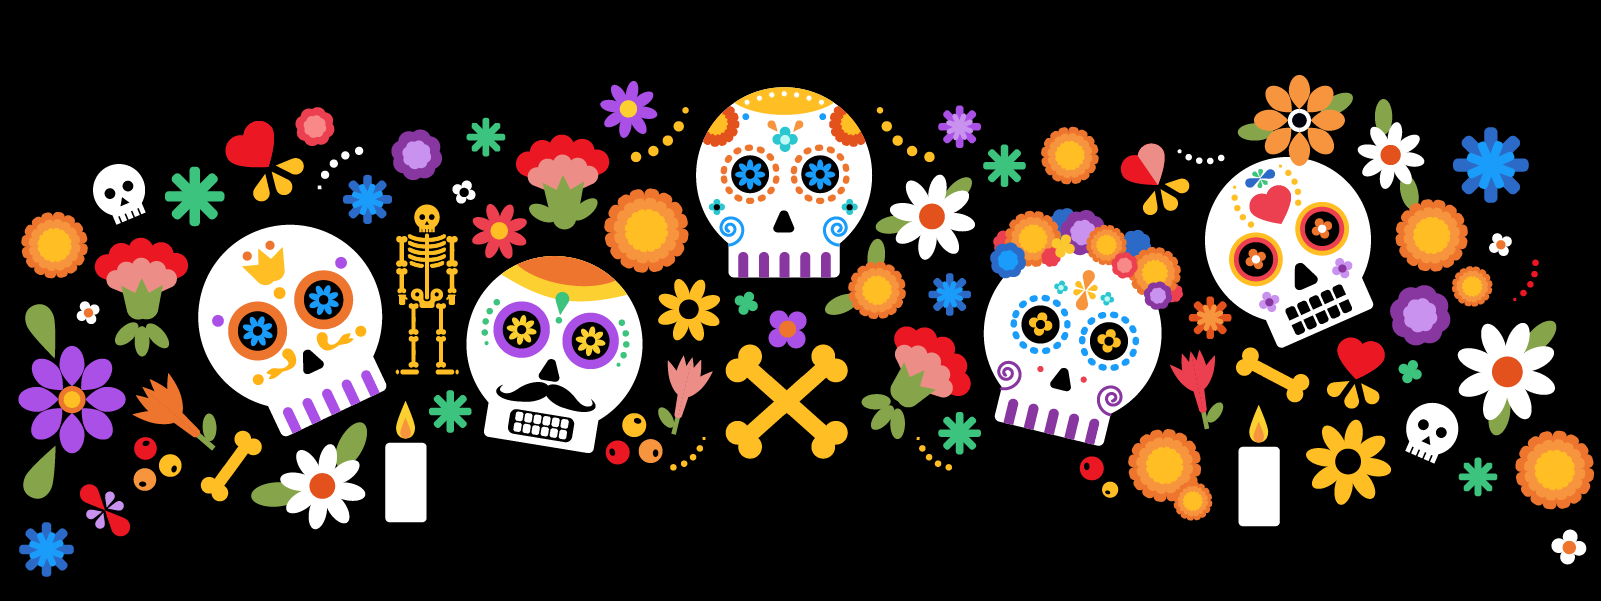 The Day of the Dead: The Aztec holiday explained in graphics thumbnail